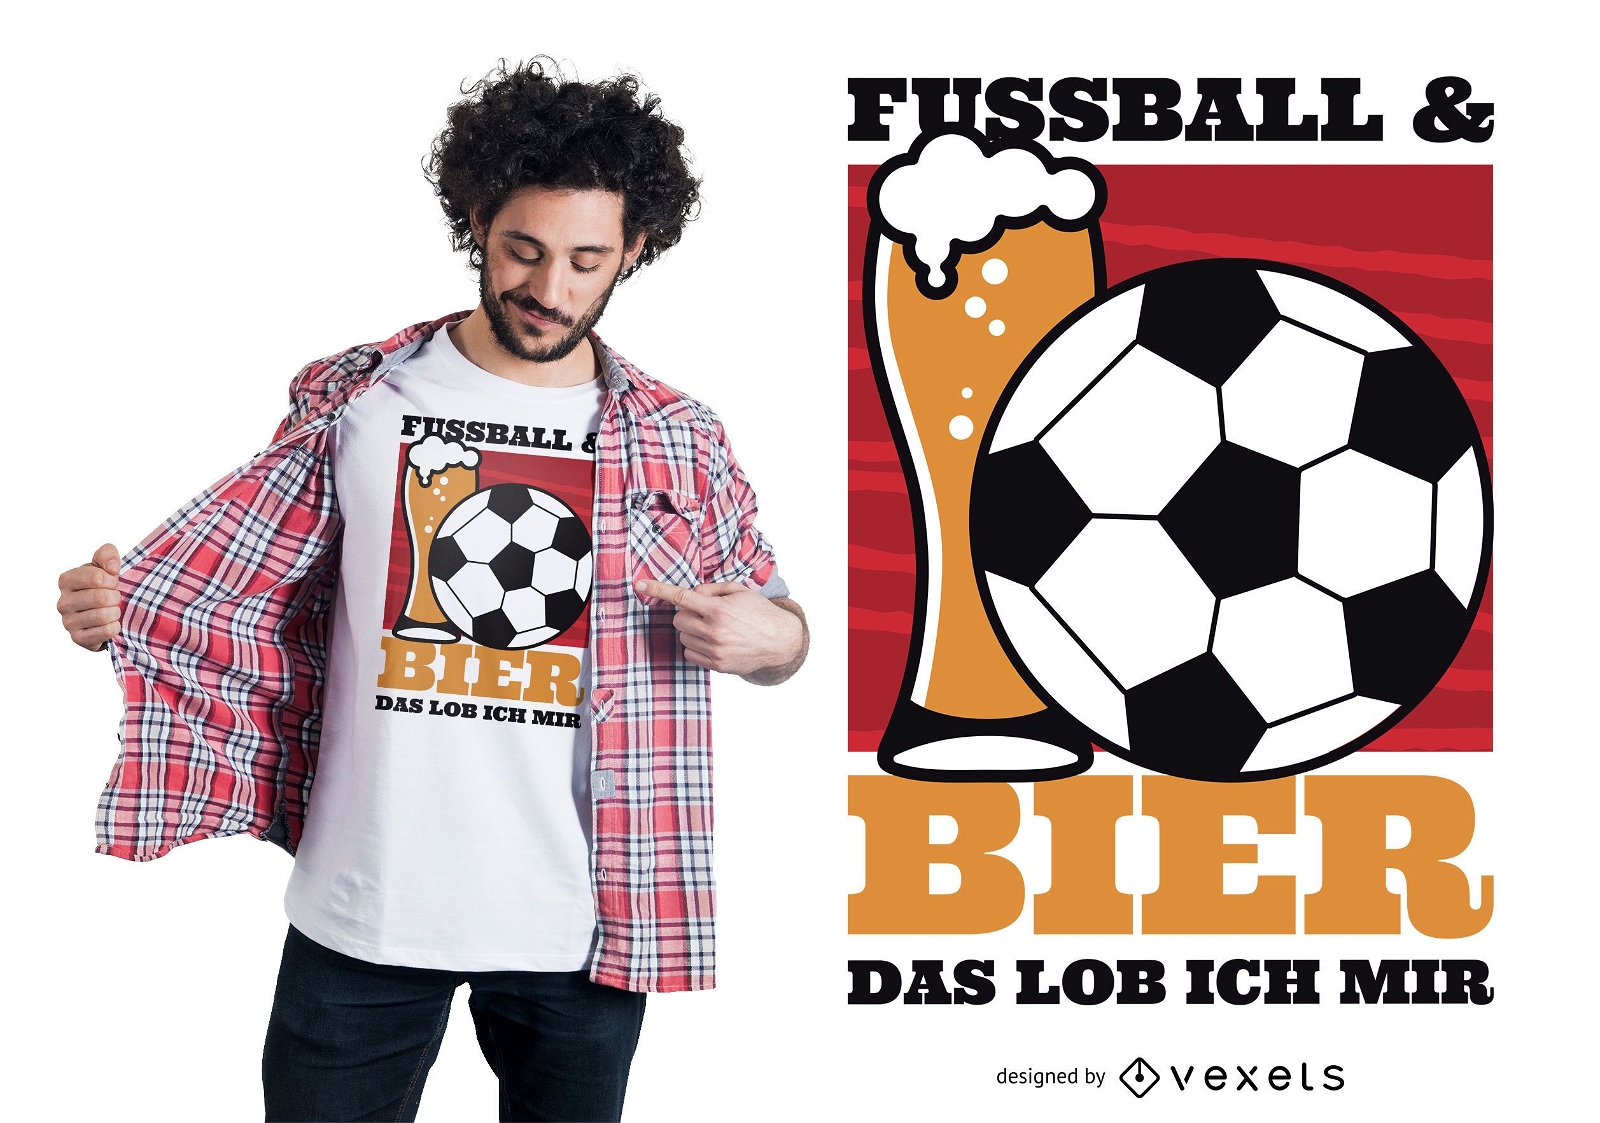 Football and beer t-shirt design